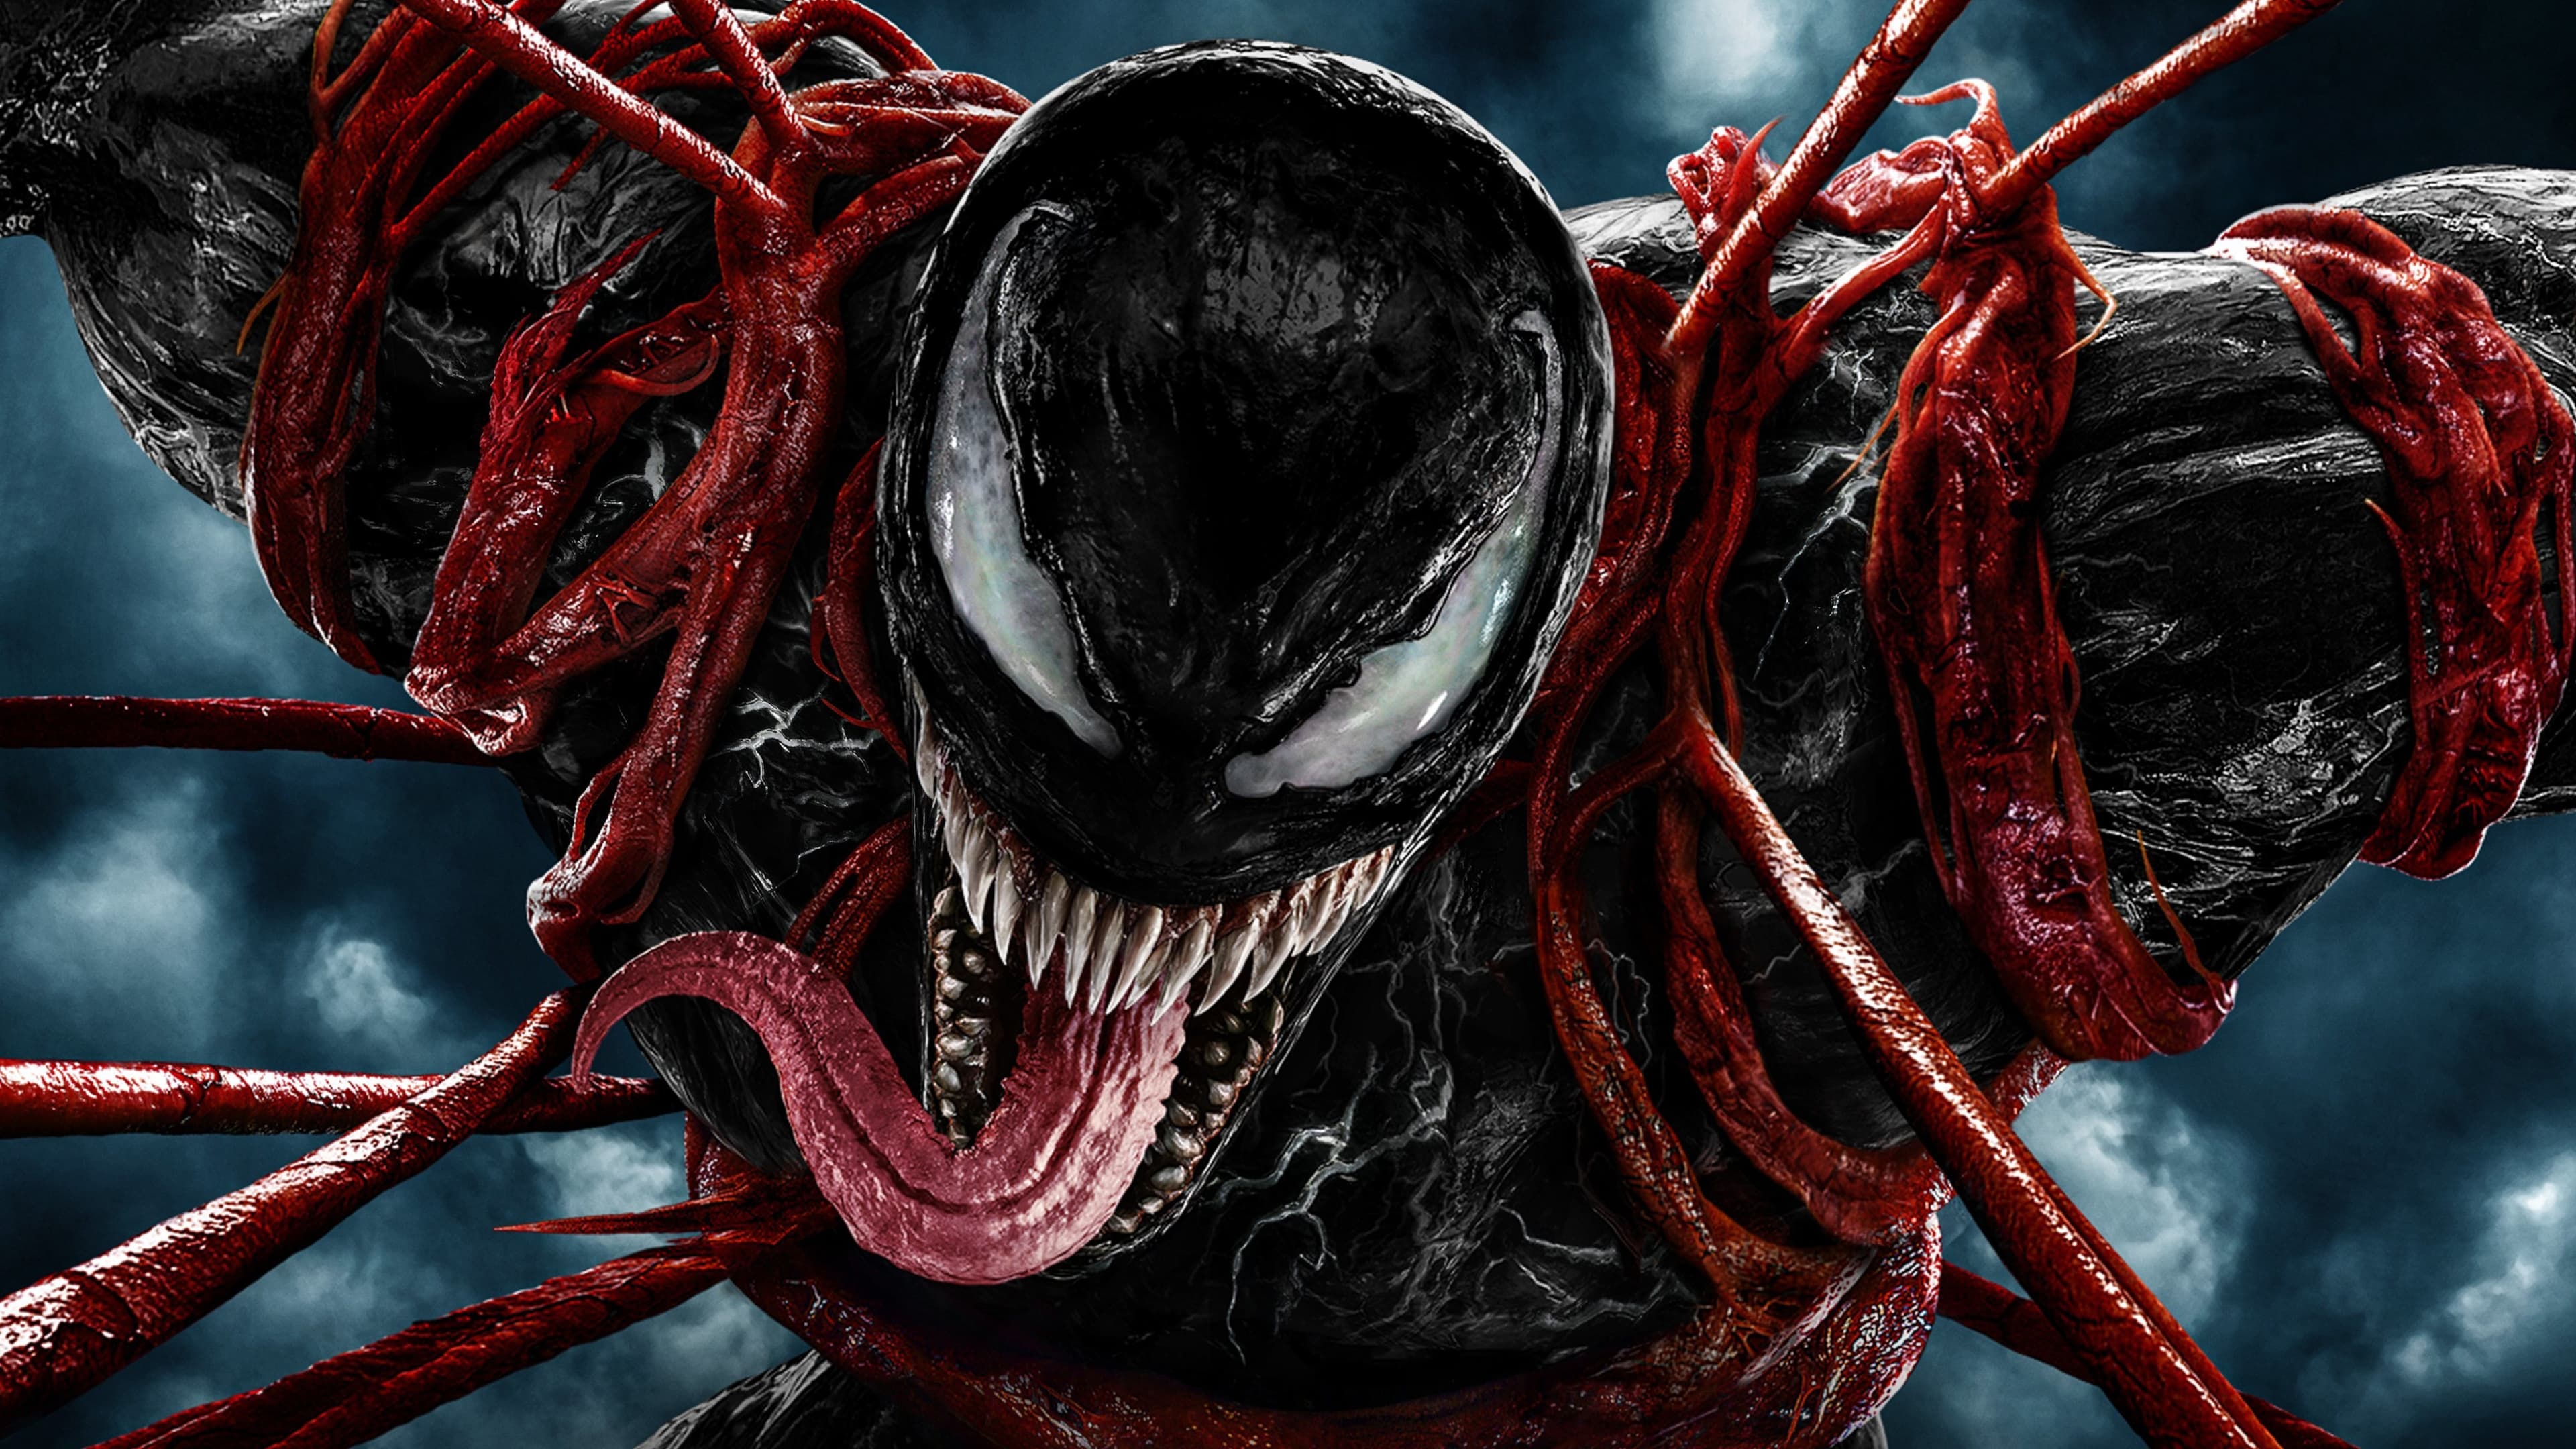 It's progressing on 'Venom 3': Tom Hardy gives a promising update on the Marvel sequel